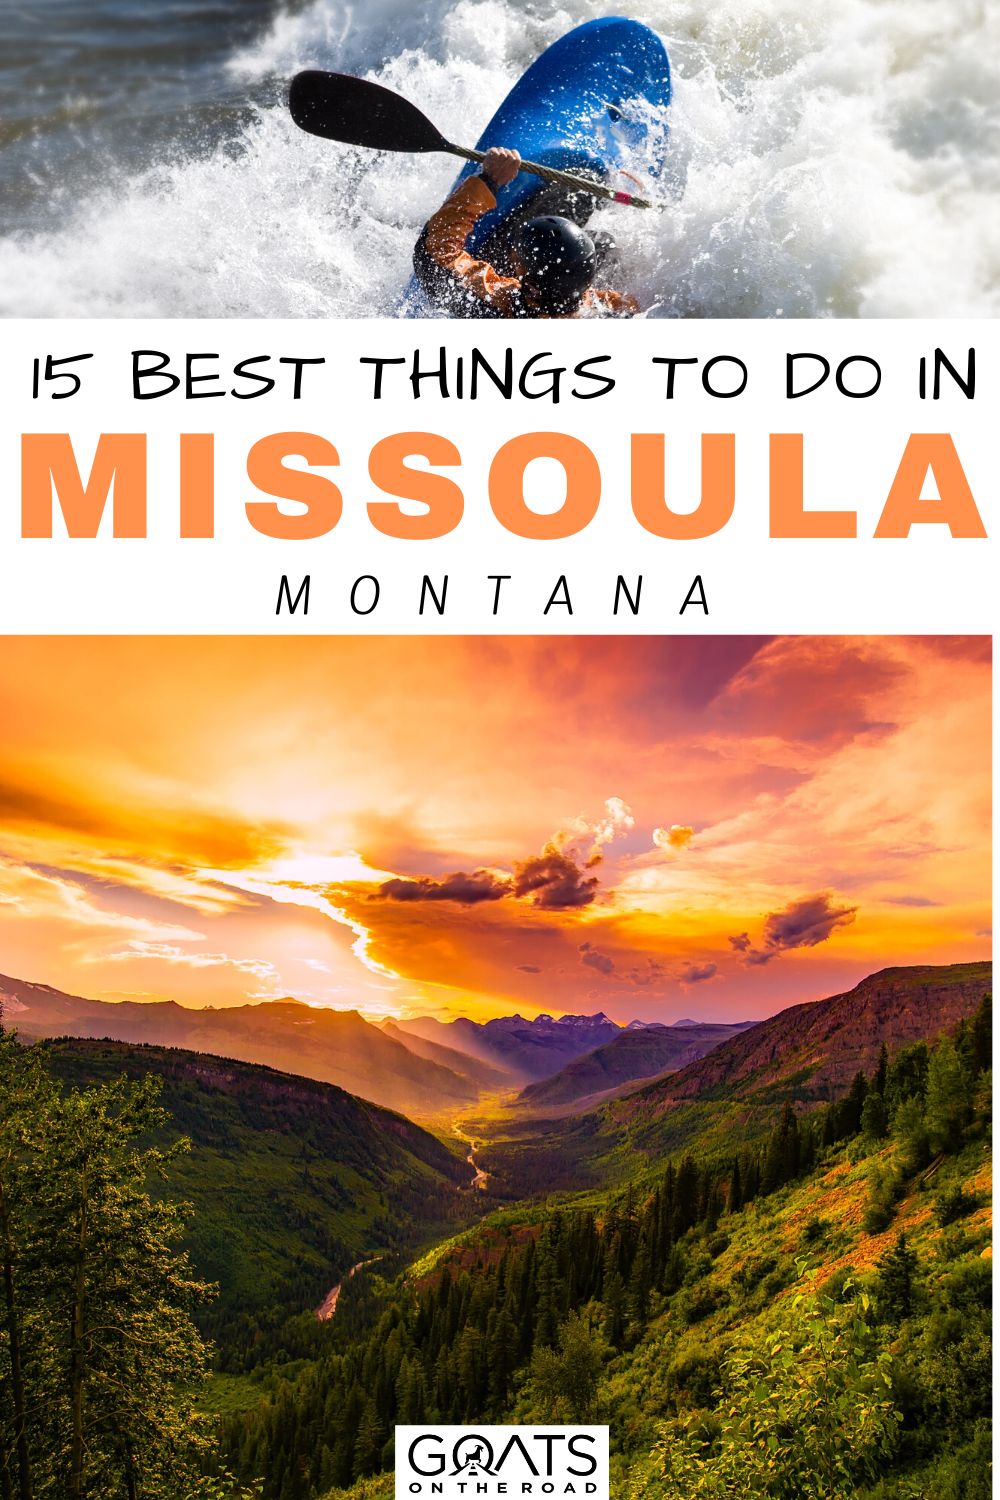 “15 Best Things To Do in Missoula, Montana